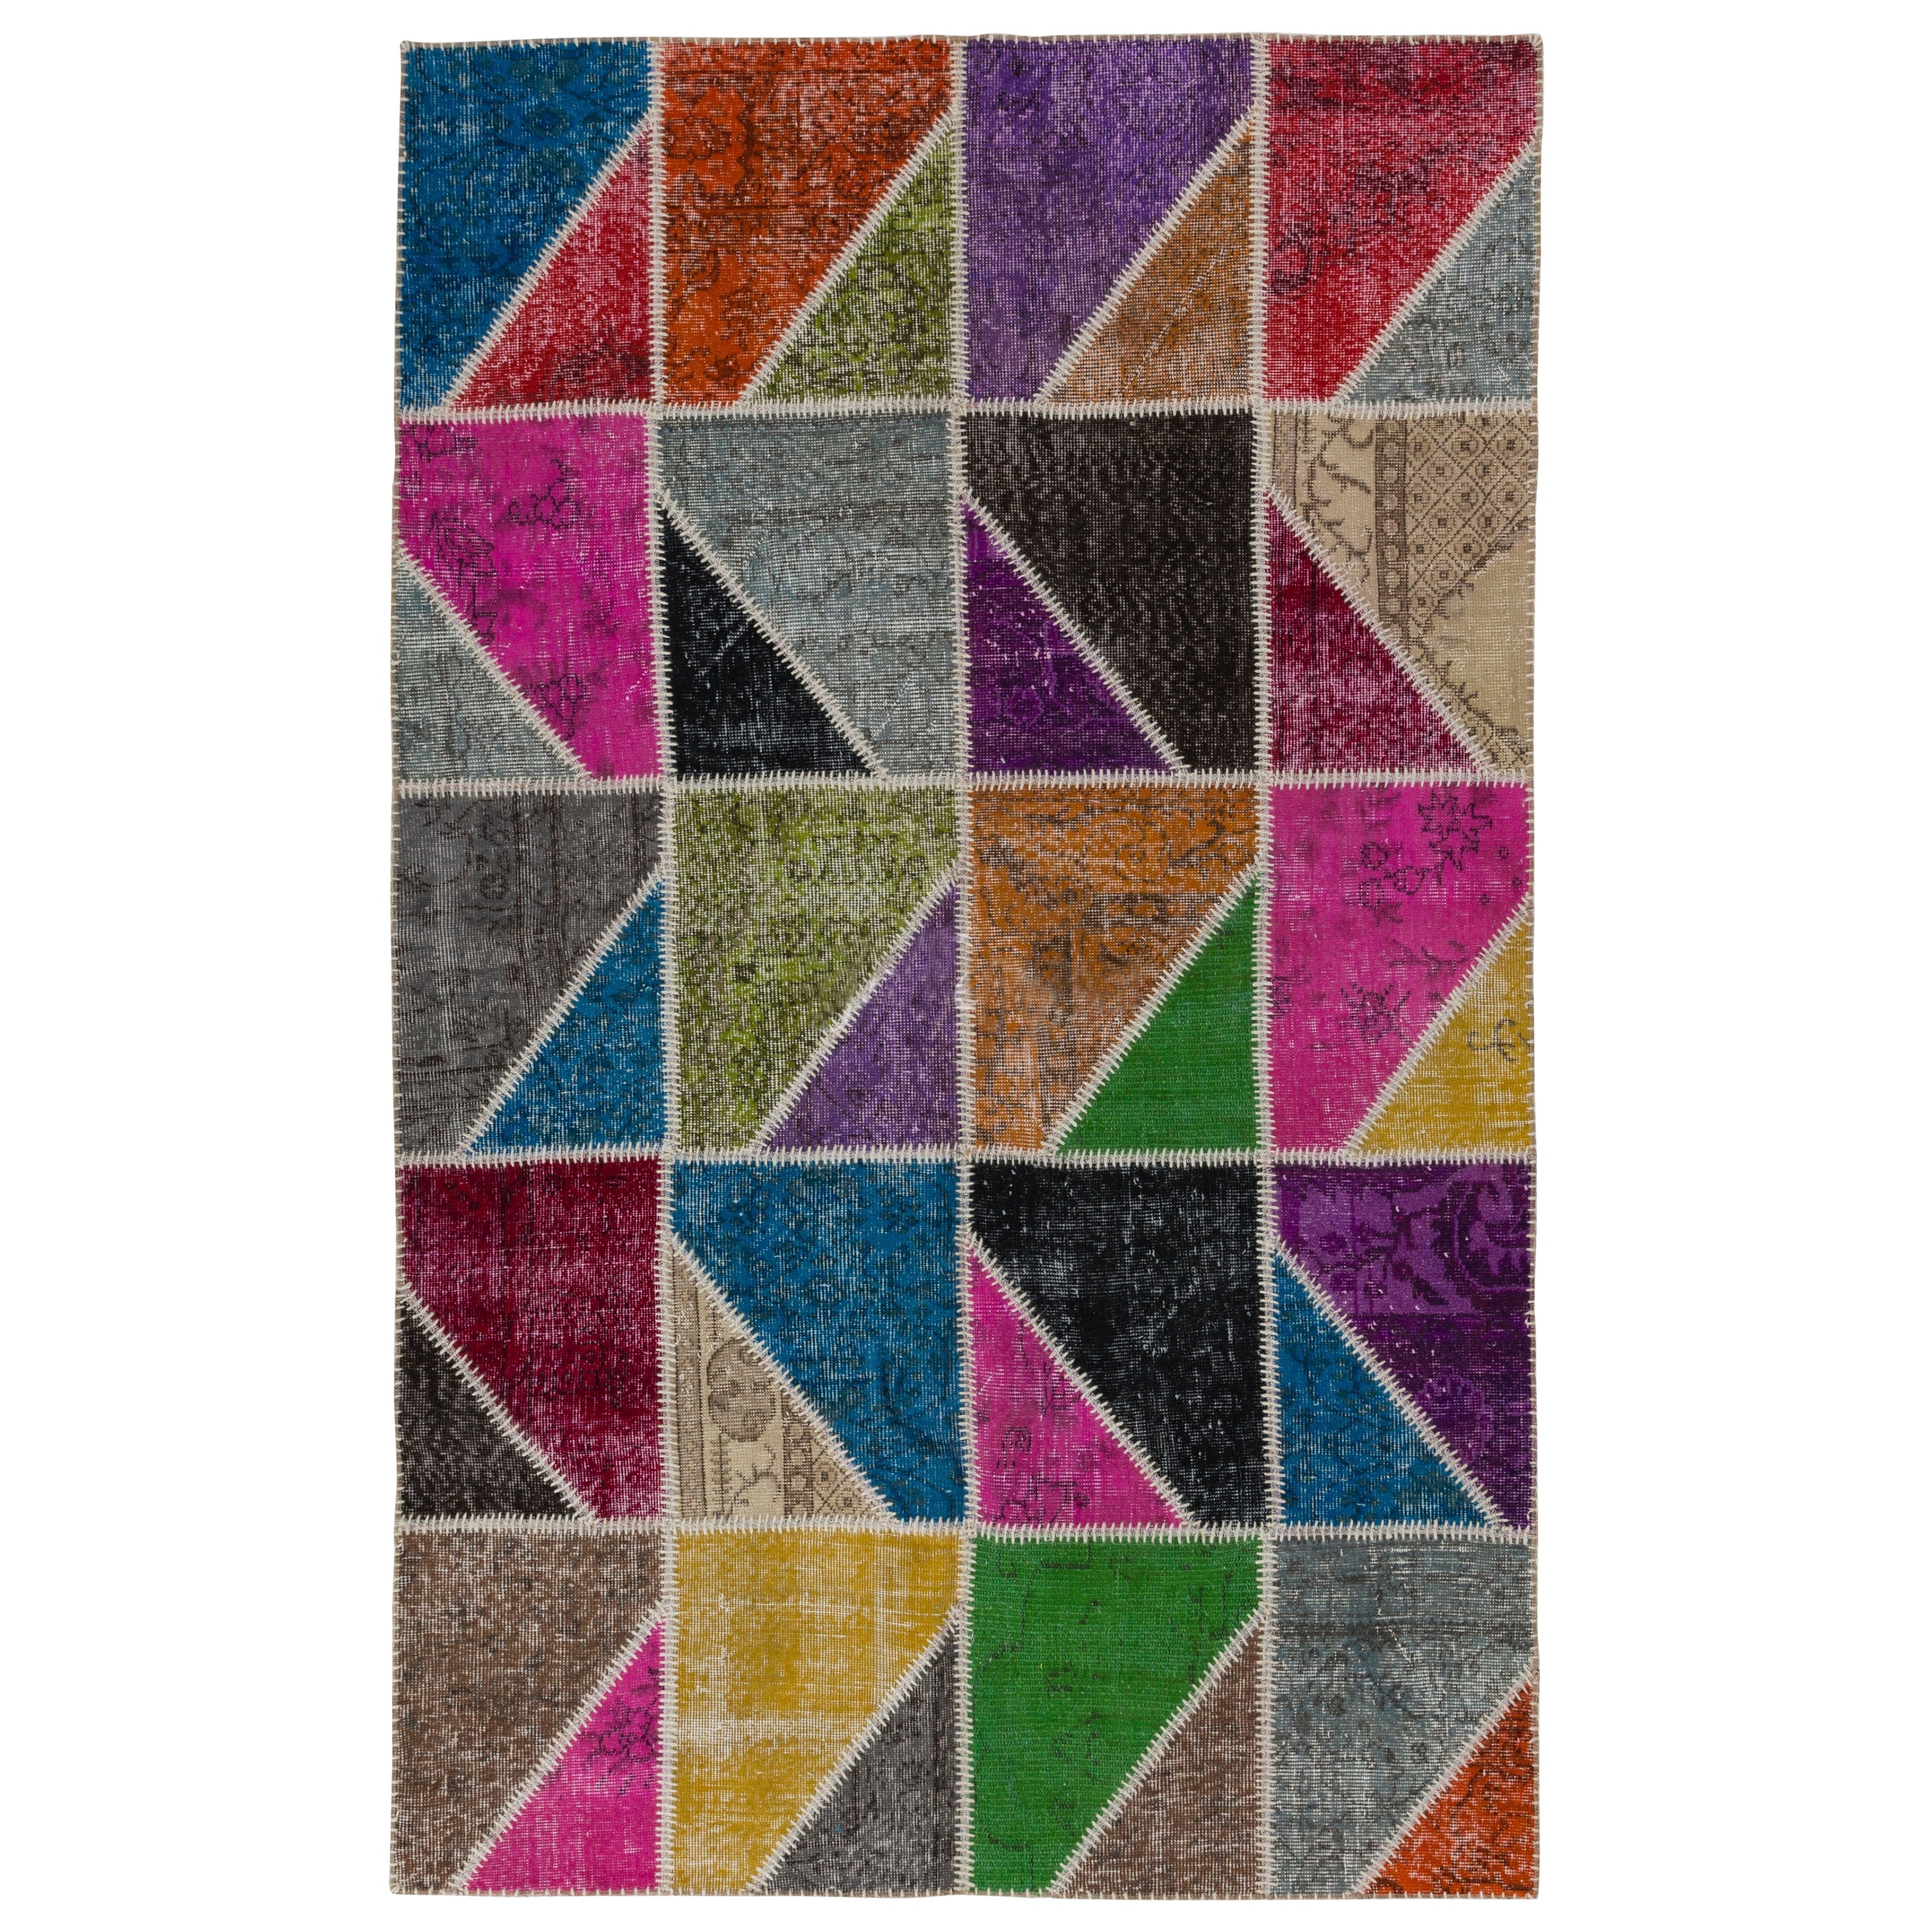 Colorful Geometric Patchwork Rug. Handmade Wool Carpet. Custom Options Available For Sale